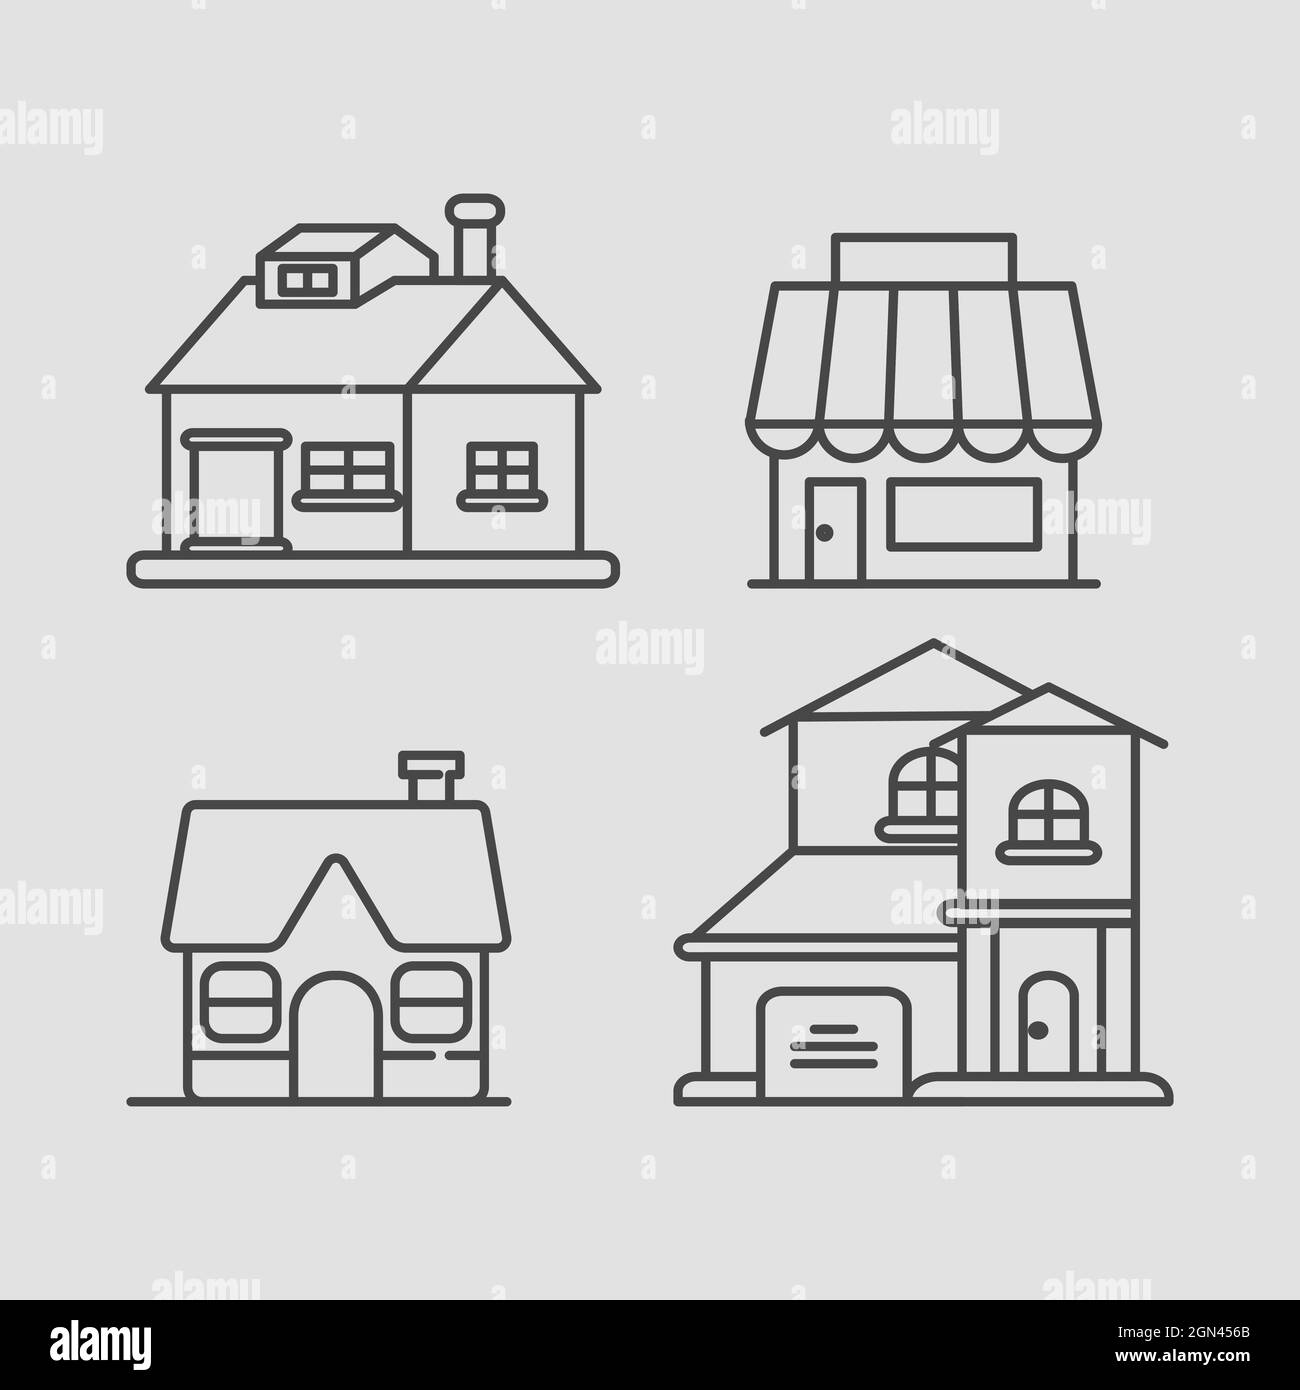 House real estate line icon set. Thin line modern house. Isolated on white background. Stock Vector